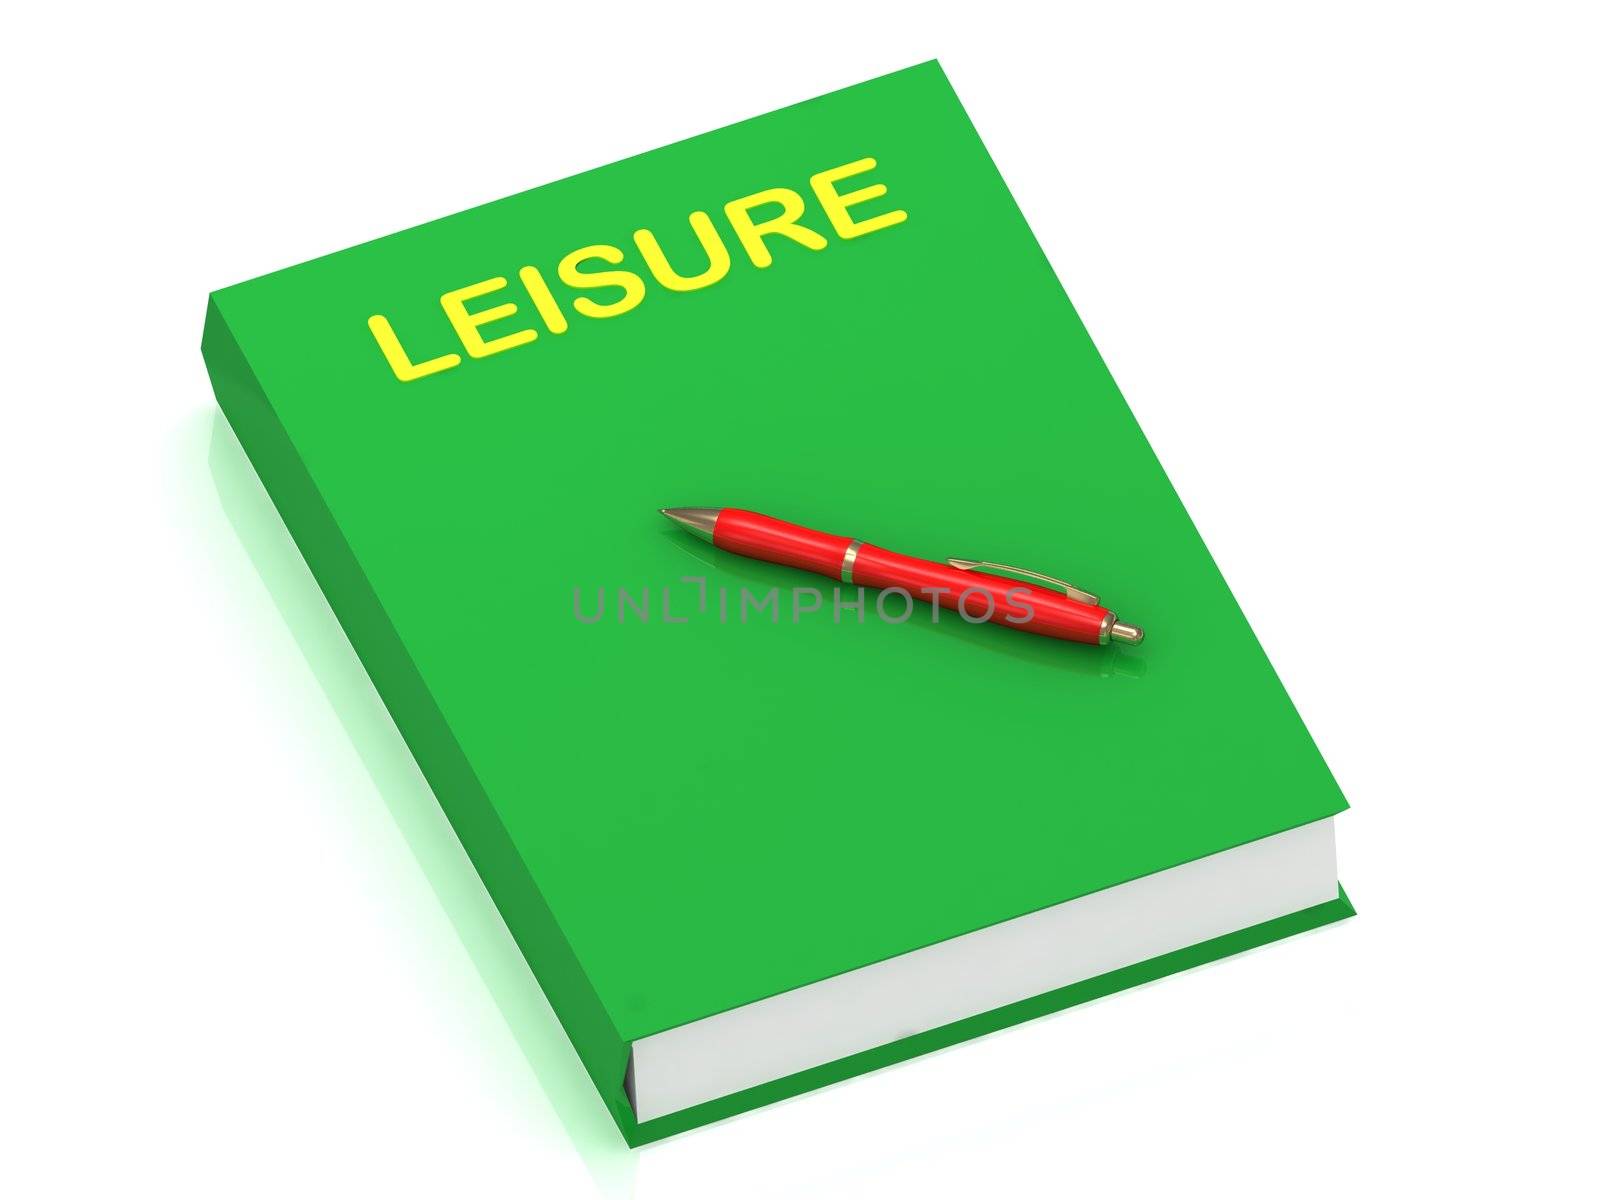 LEISURE name on cover book and red pen on the book. 3D illustration isolated on white background